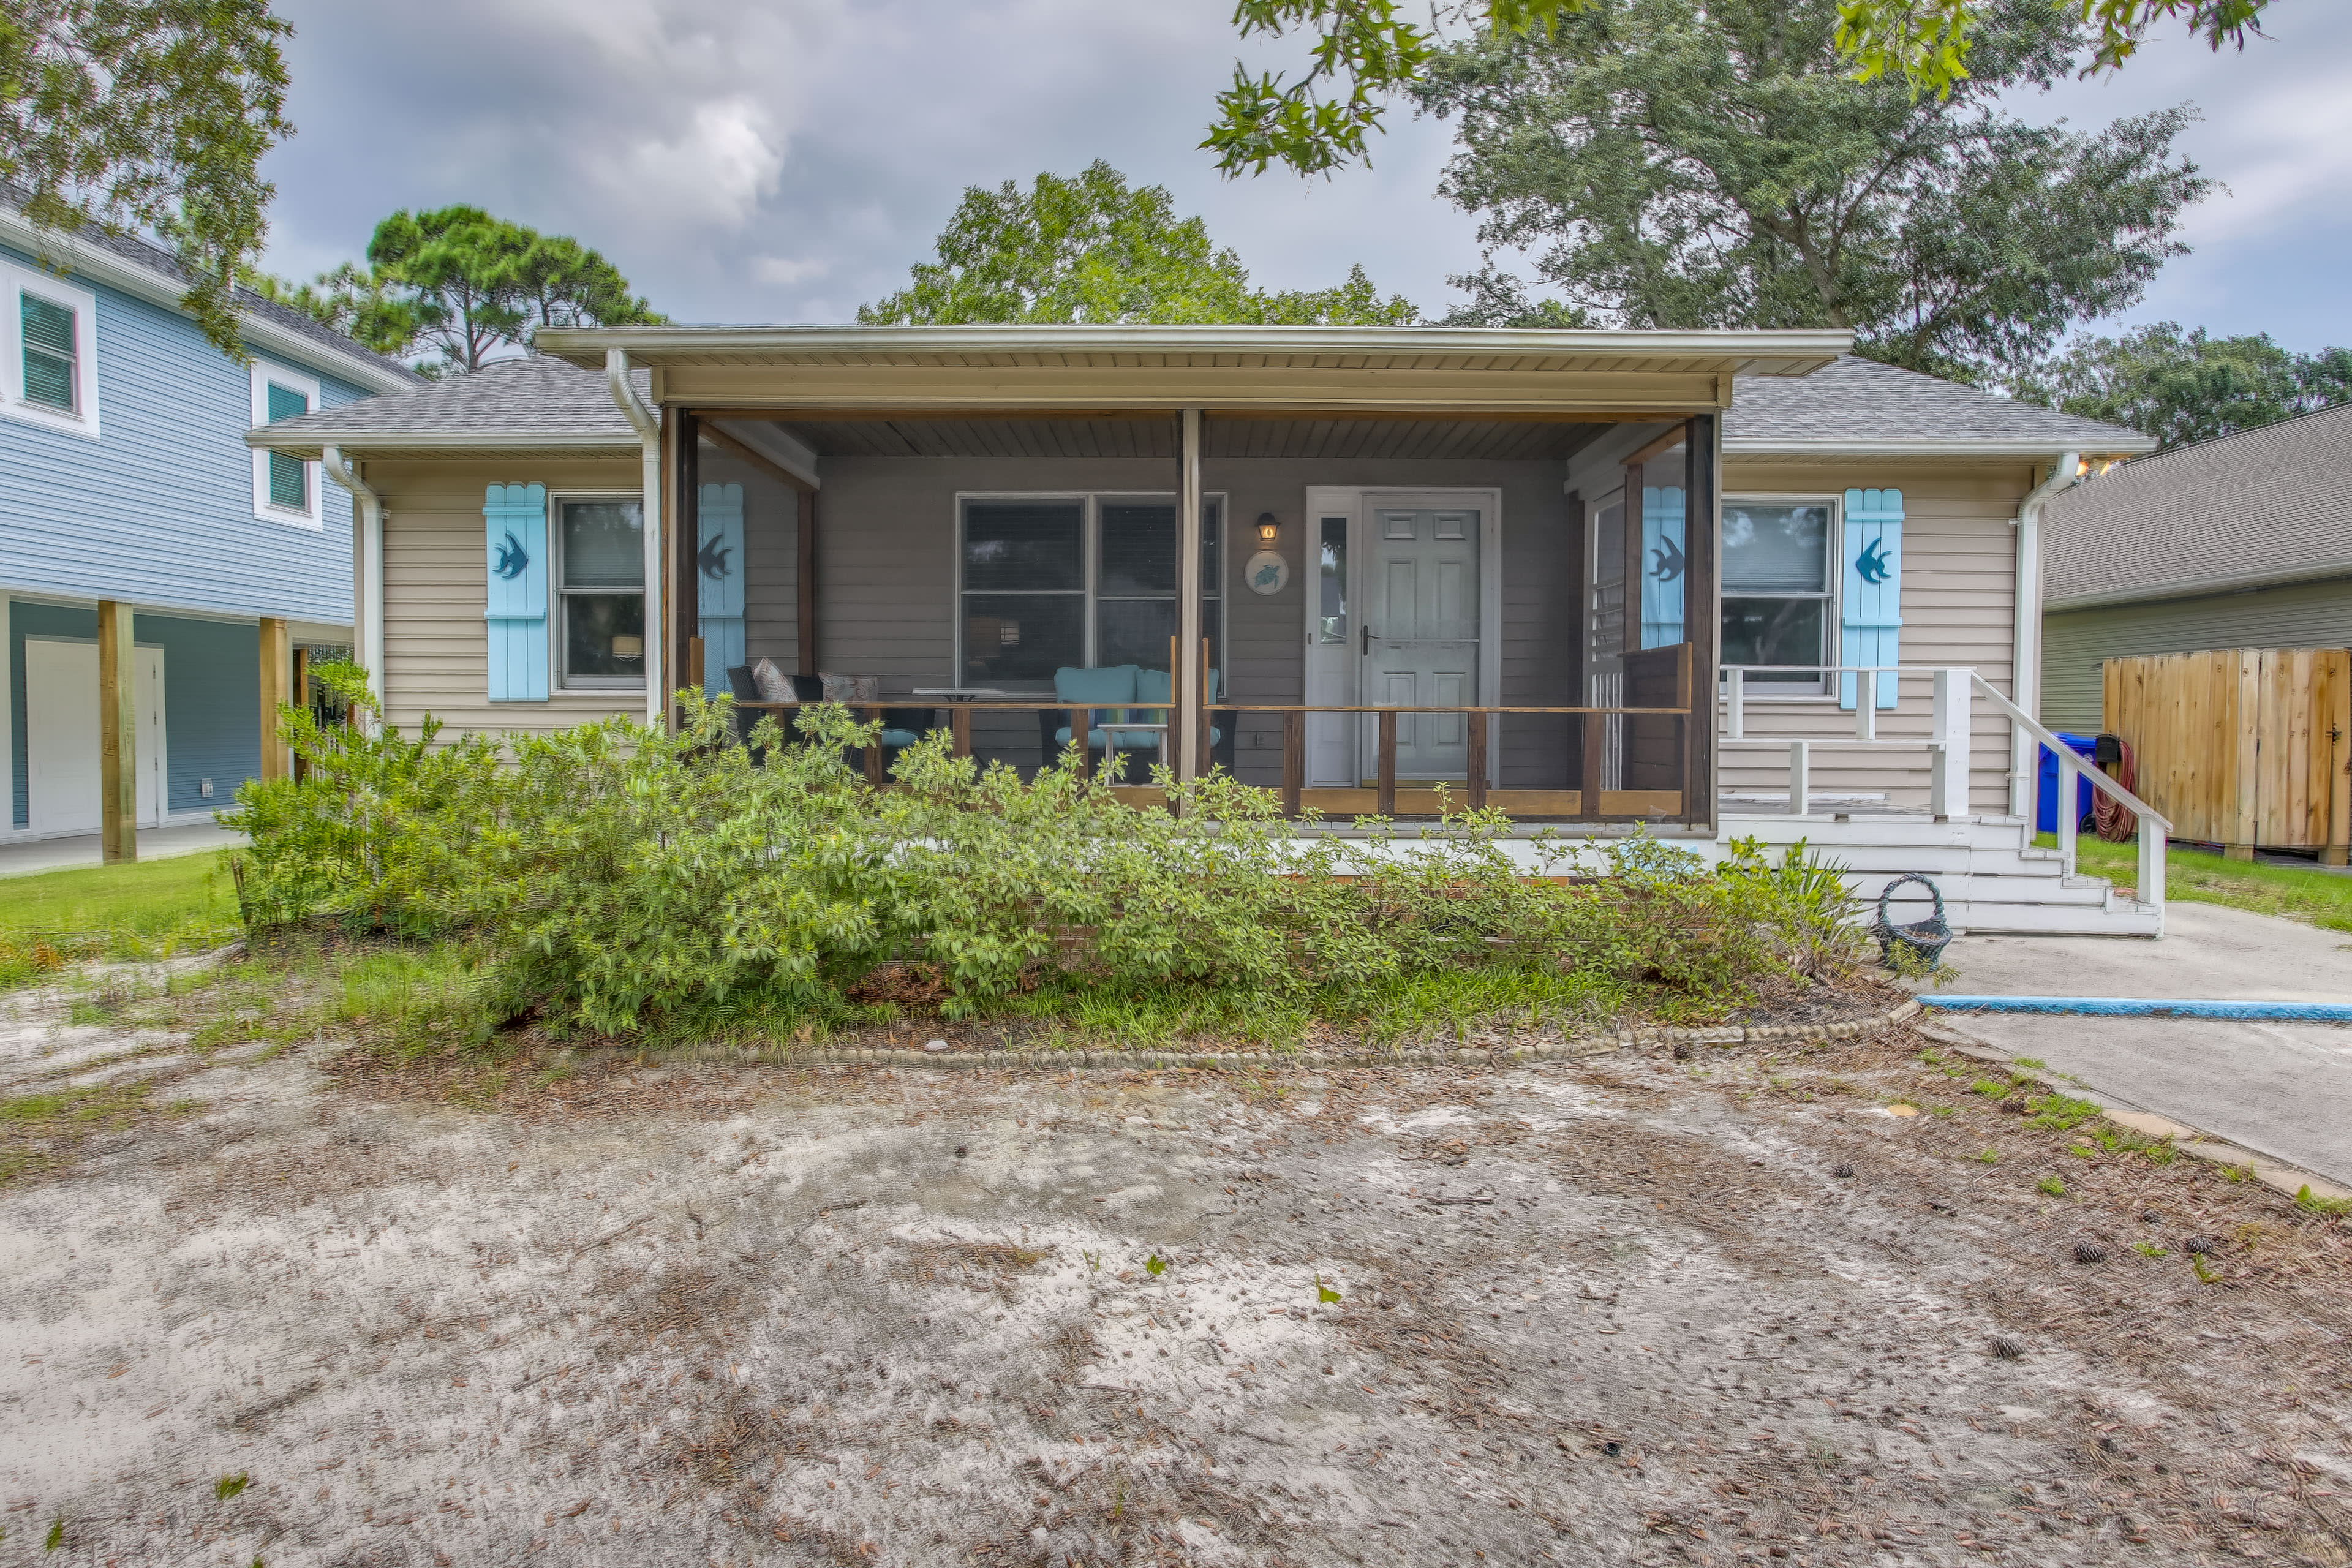 Oak Island Vacation Rental | 3BR | 2BA | Stairs Required | 1,190 Sq Ft